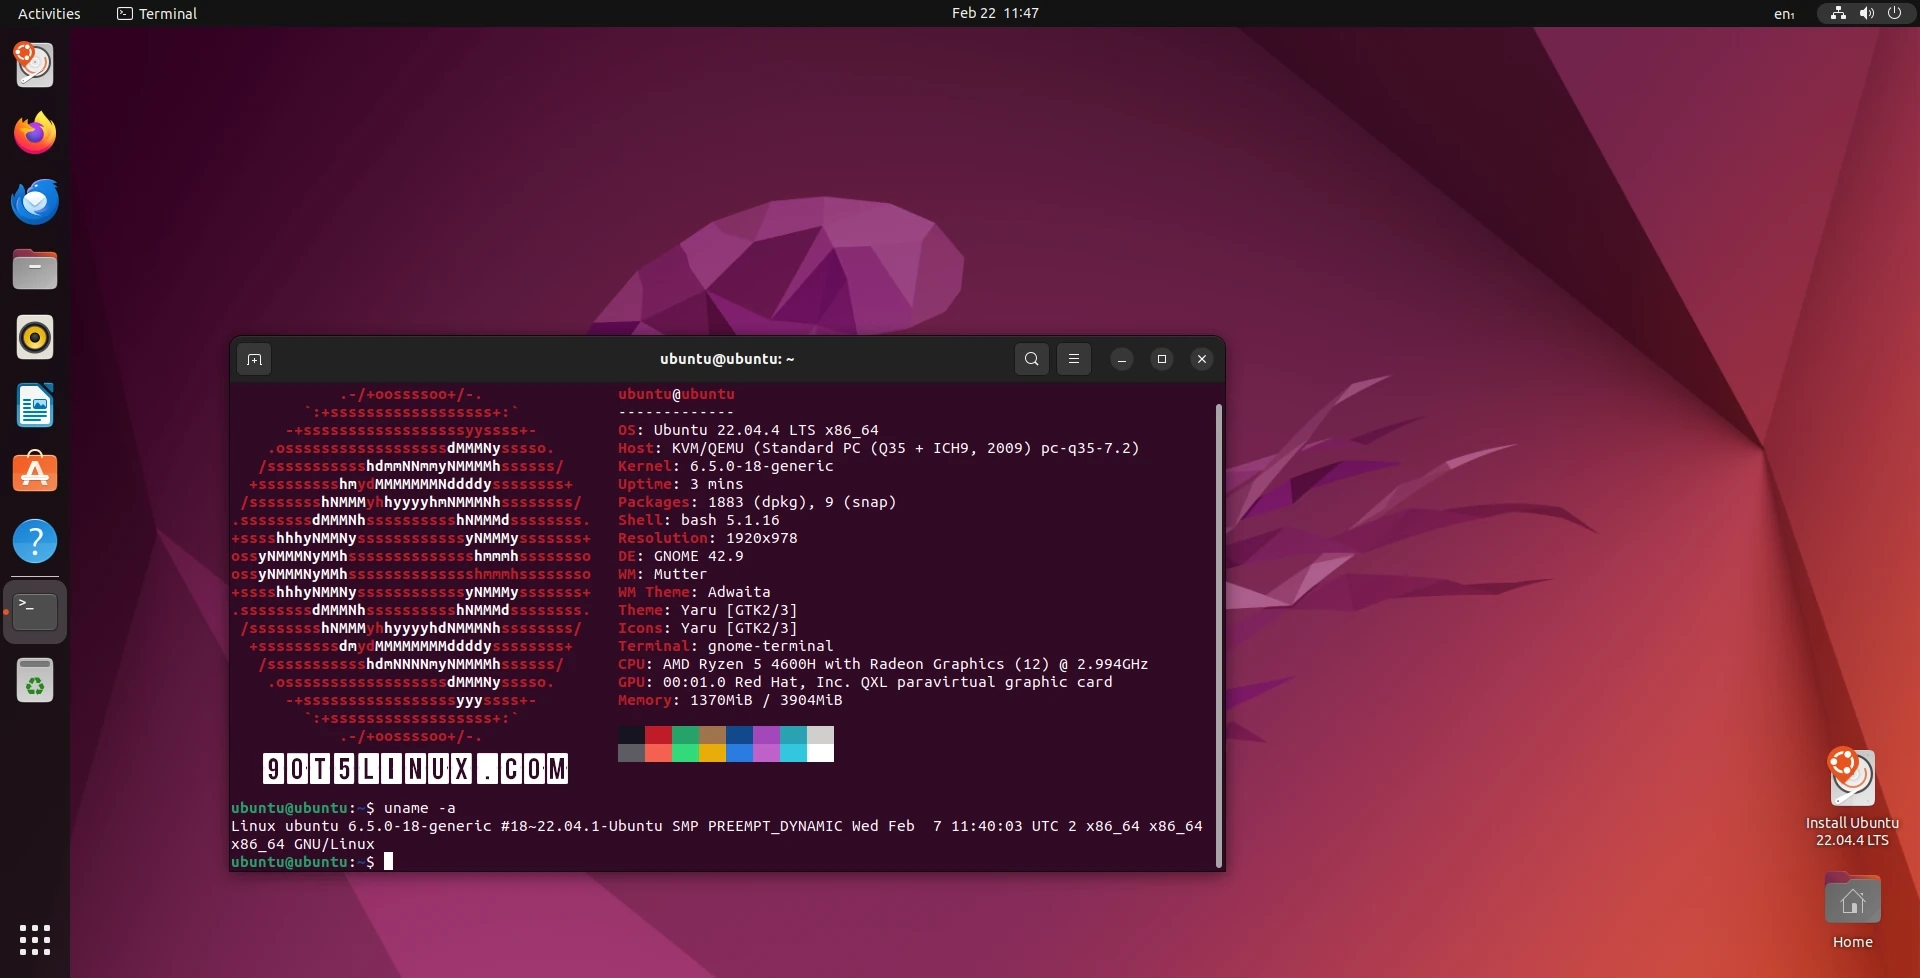 Launch of Ubuntu 22.04.4 LTS (Jammy Jellyfish): Featuring Linux Kernel 6.5 and Mesa 23.2